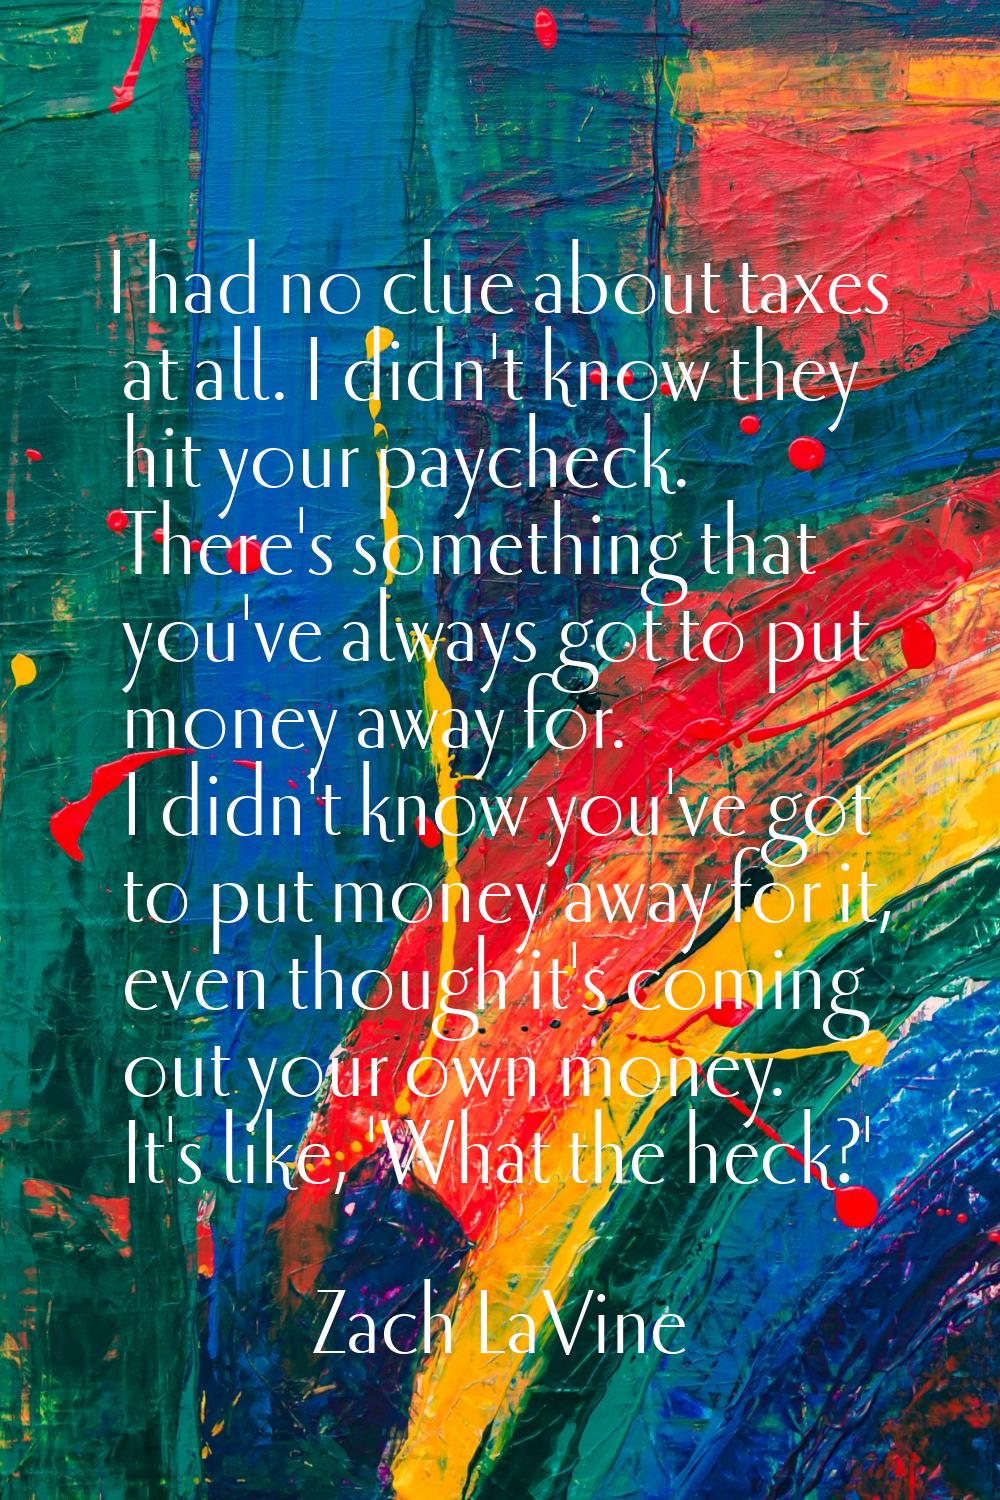 I had no clue about taxes at all. I didn't know they hit your paycheck. There's something that you'